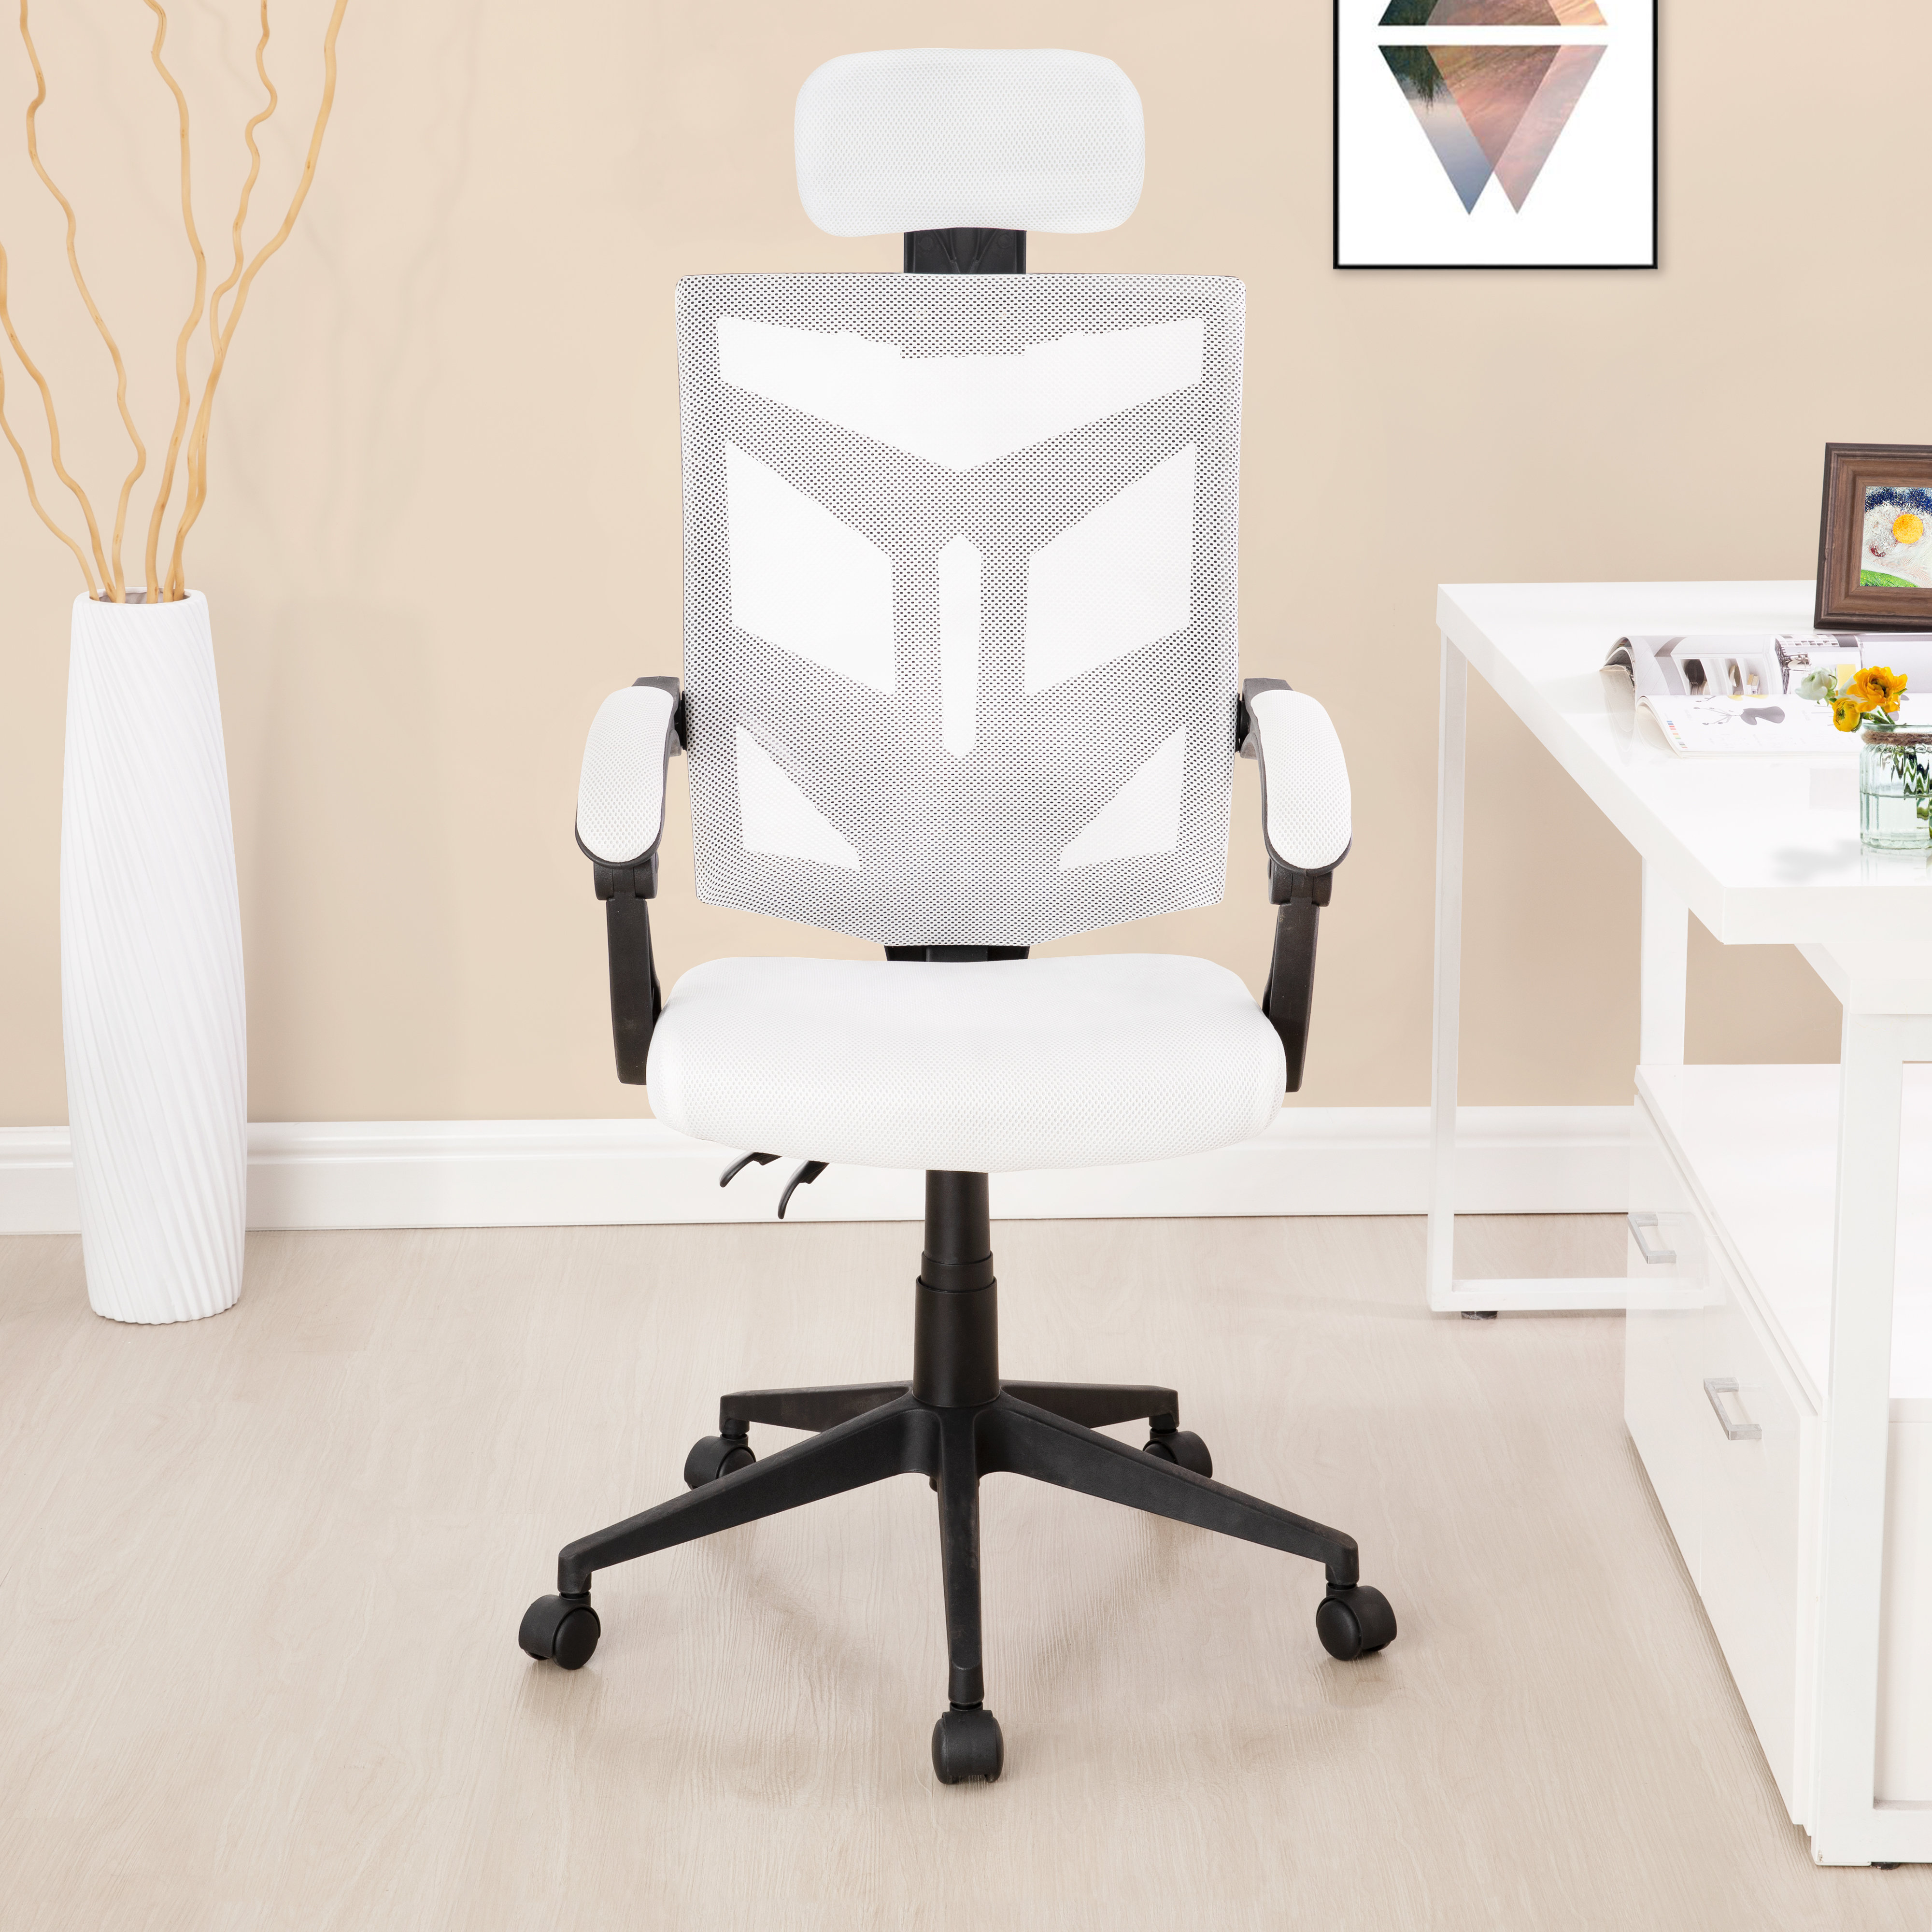 ANGEL QUEEN Office Chair Black Ergonomic High Back Mesh Chair with Adjustable Arm Rests Computer Chair Height Adjustable and Head Support 3 Adjustable Tilt Tension Swivel Desk Chair 